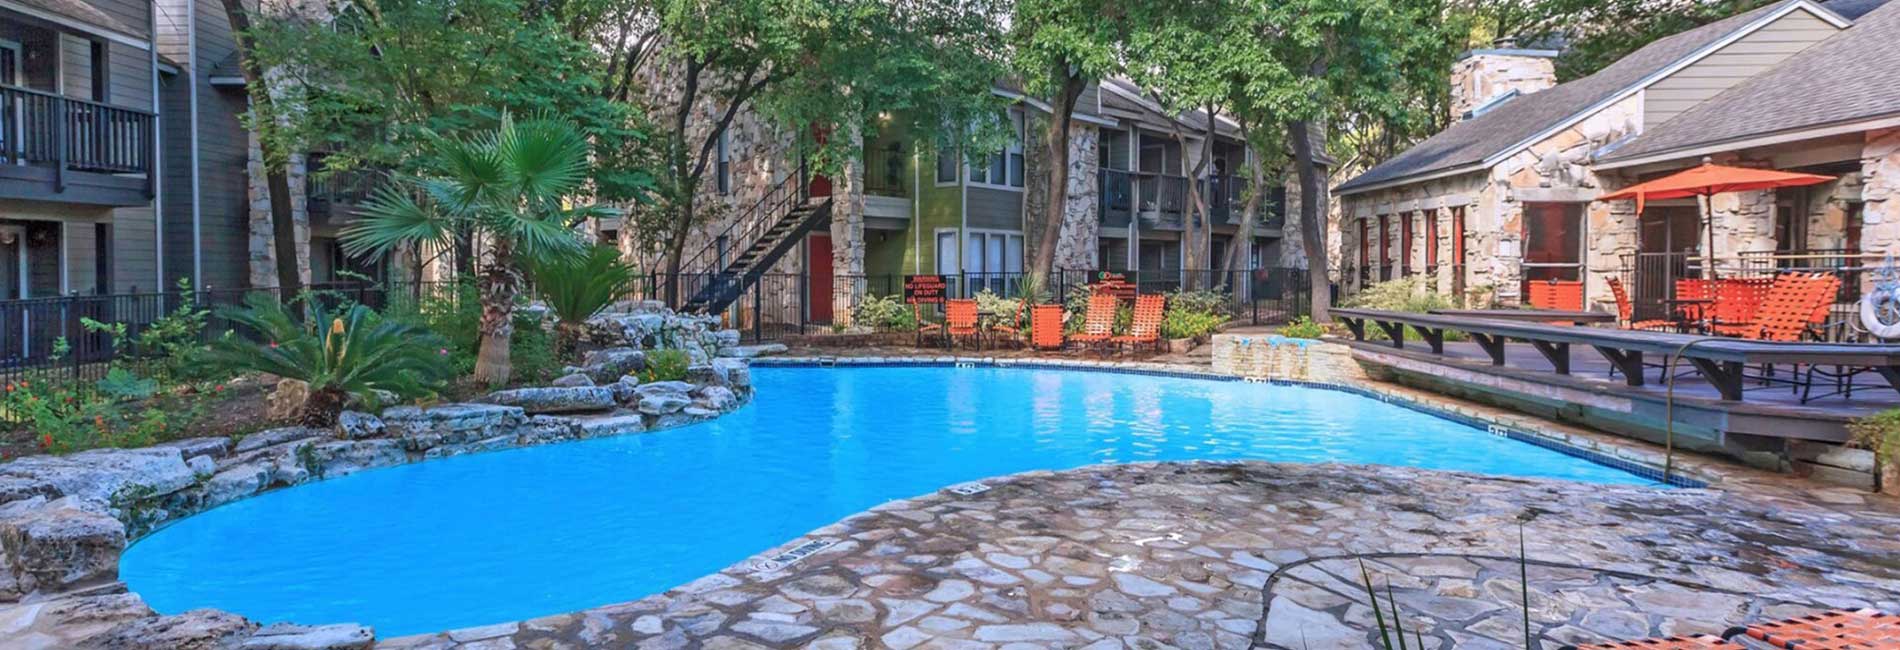 Salado Crossing Apartments with Swimming Pool